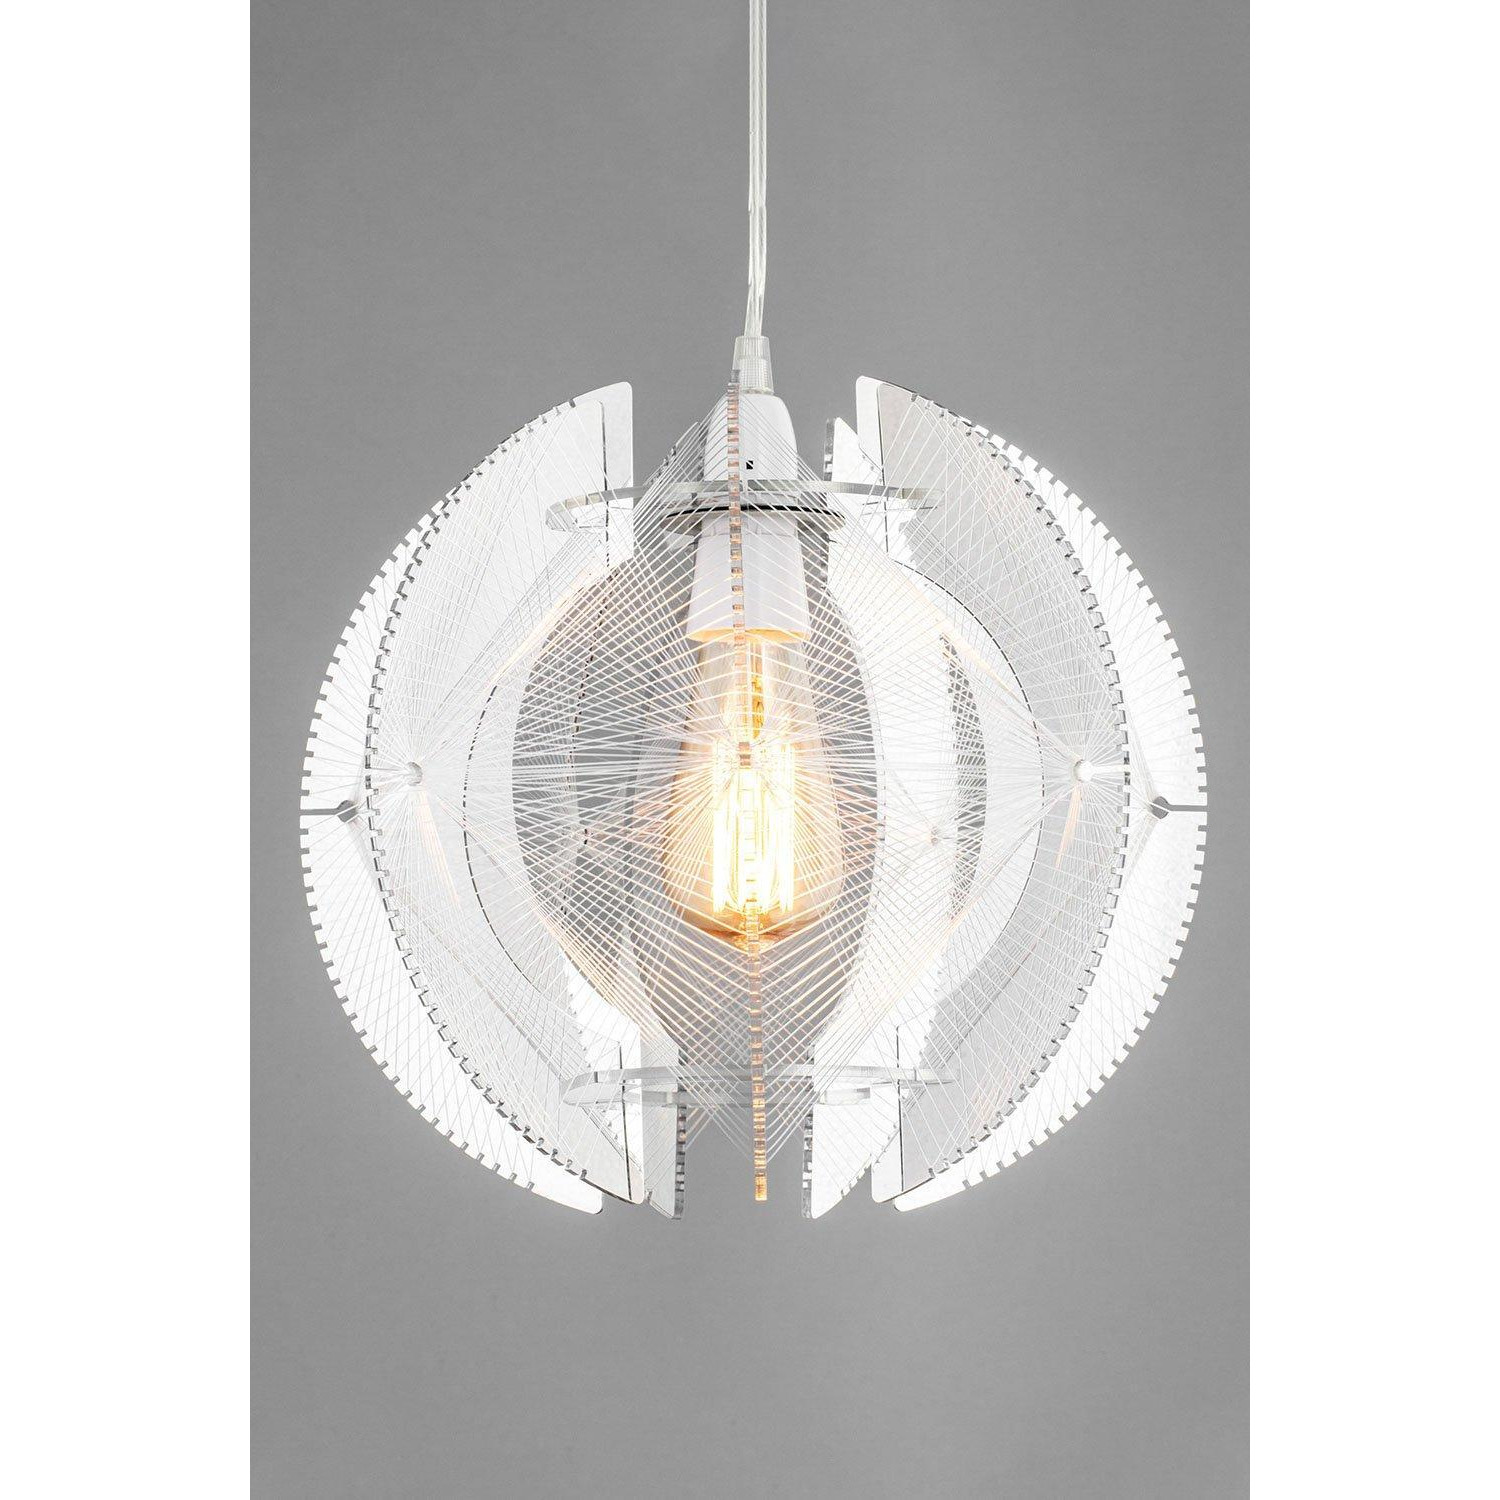 Weston Easy Fit Light Fitting - image 1